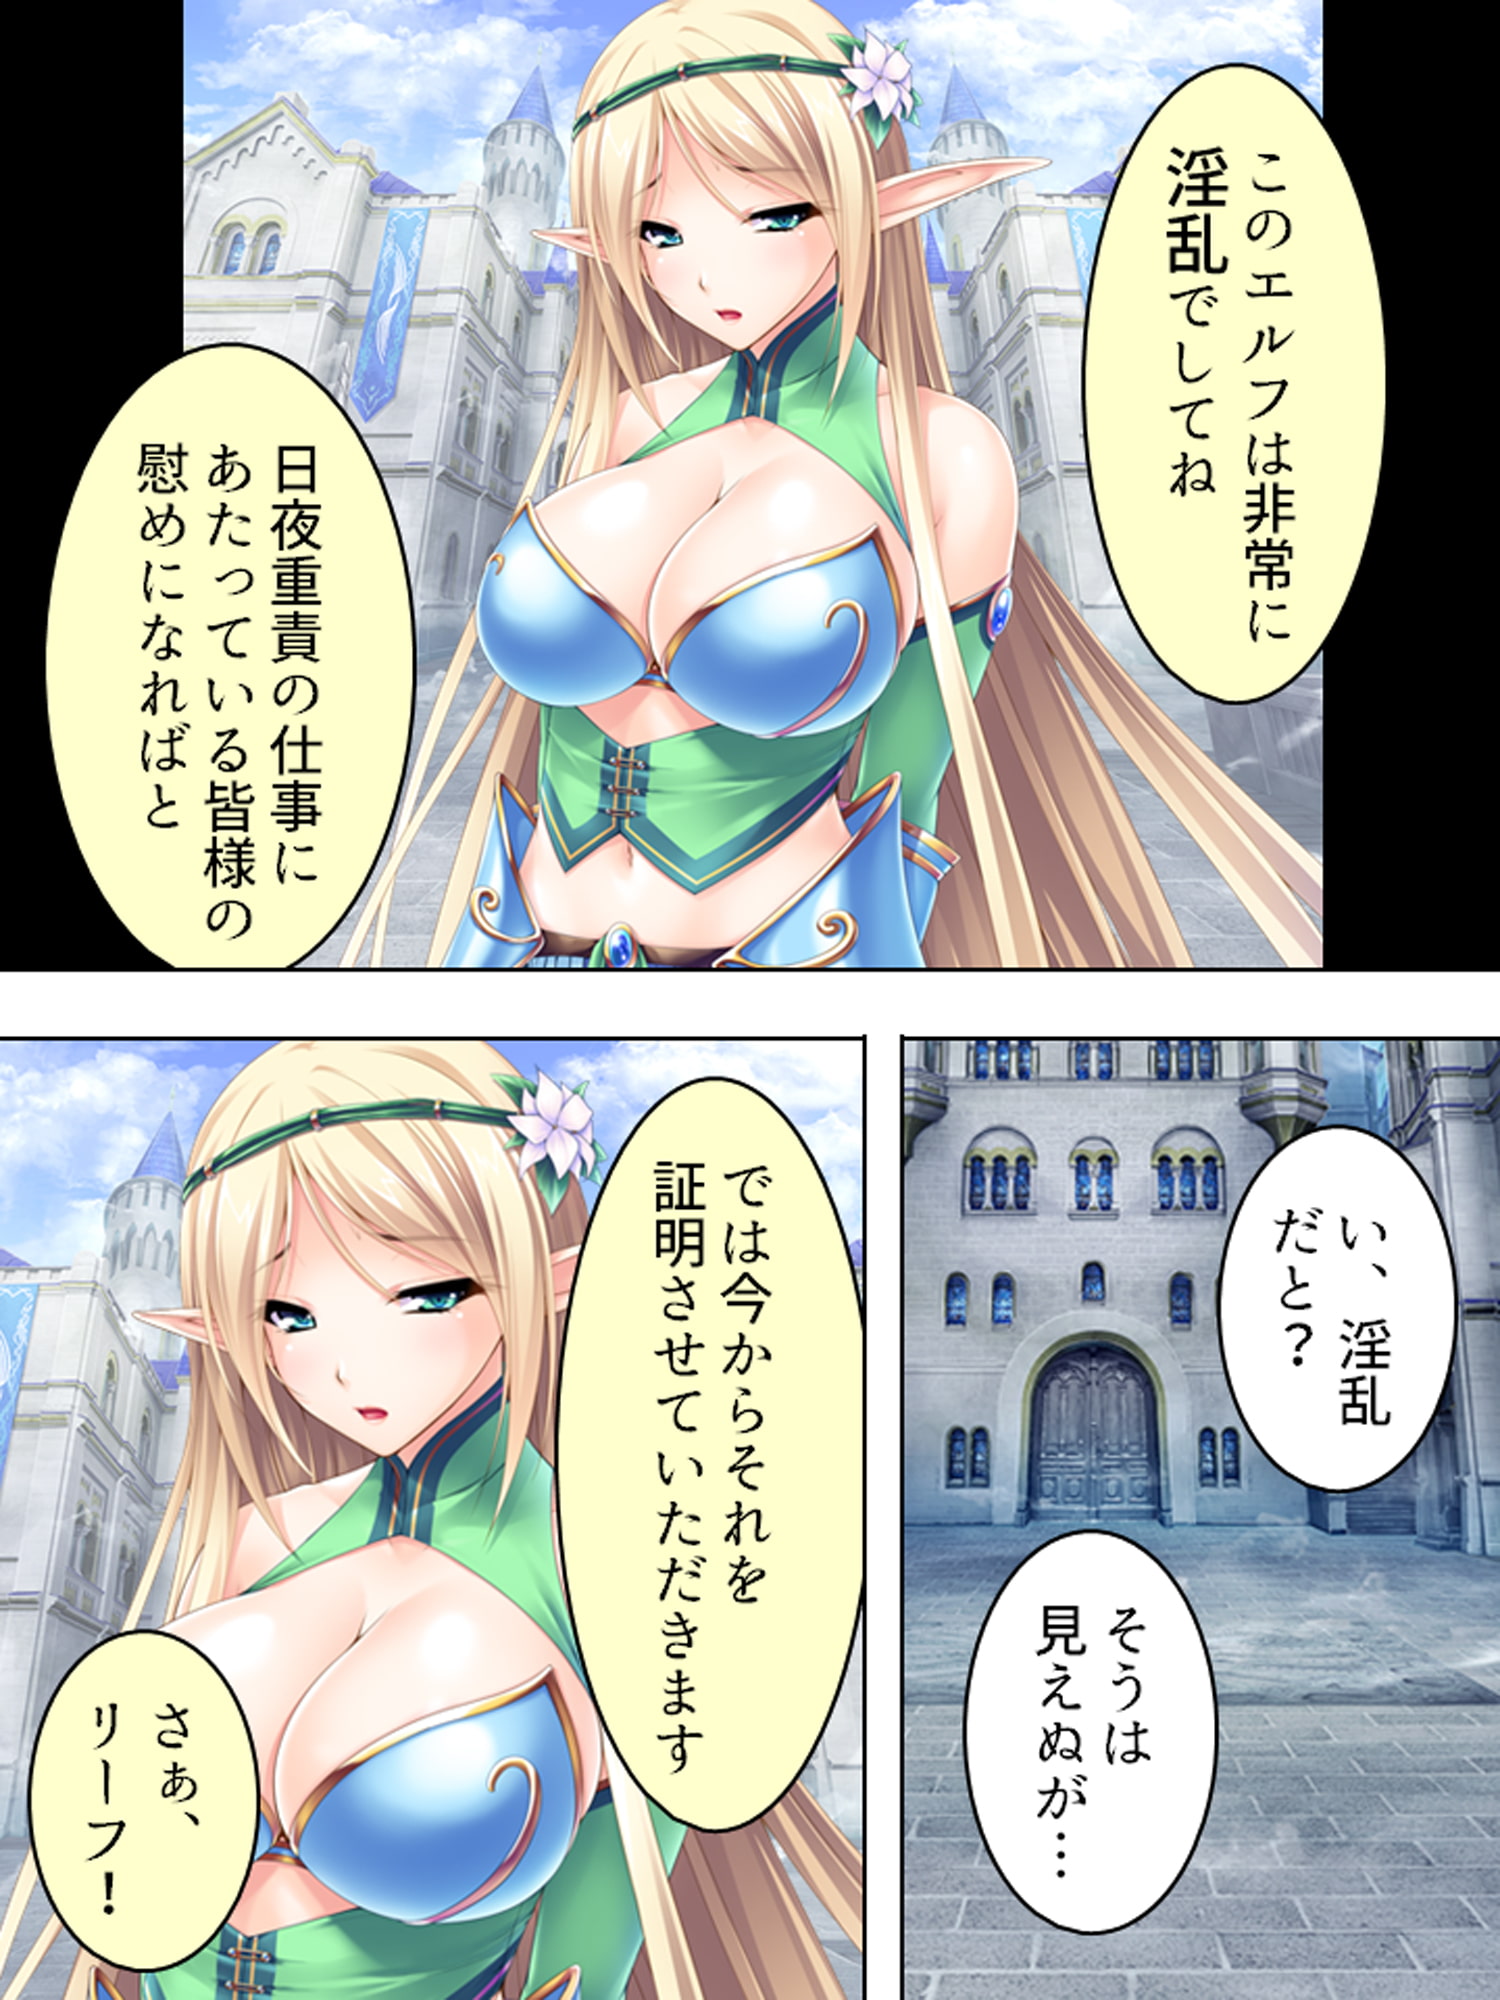 Using Isekai Cheats to Impregnate the Busty Female Knight! Part 2